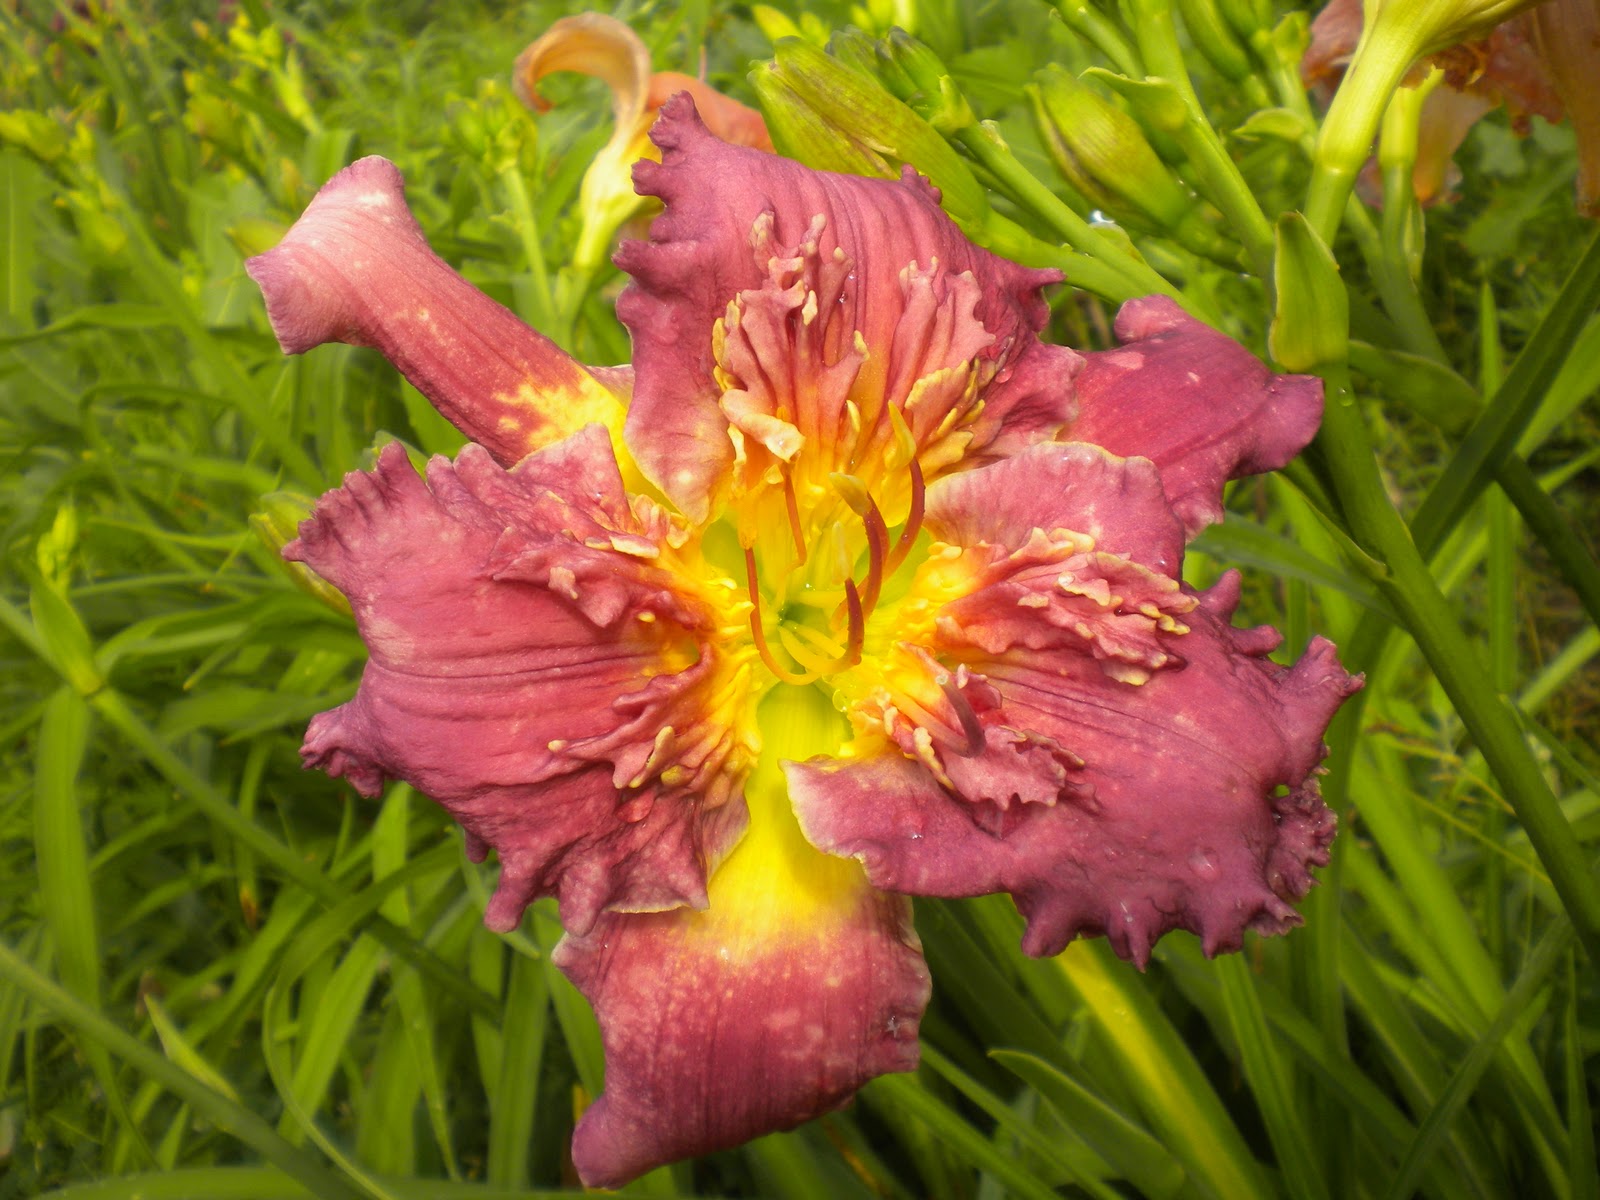 Rainbow Hill Daylily Farm: DAN PATCH 2nd generation of bearded daylily forms "A New Age in Daylilies" by Best